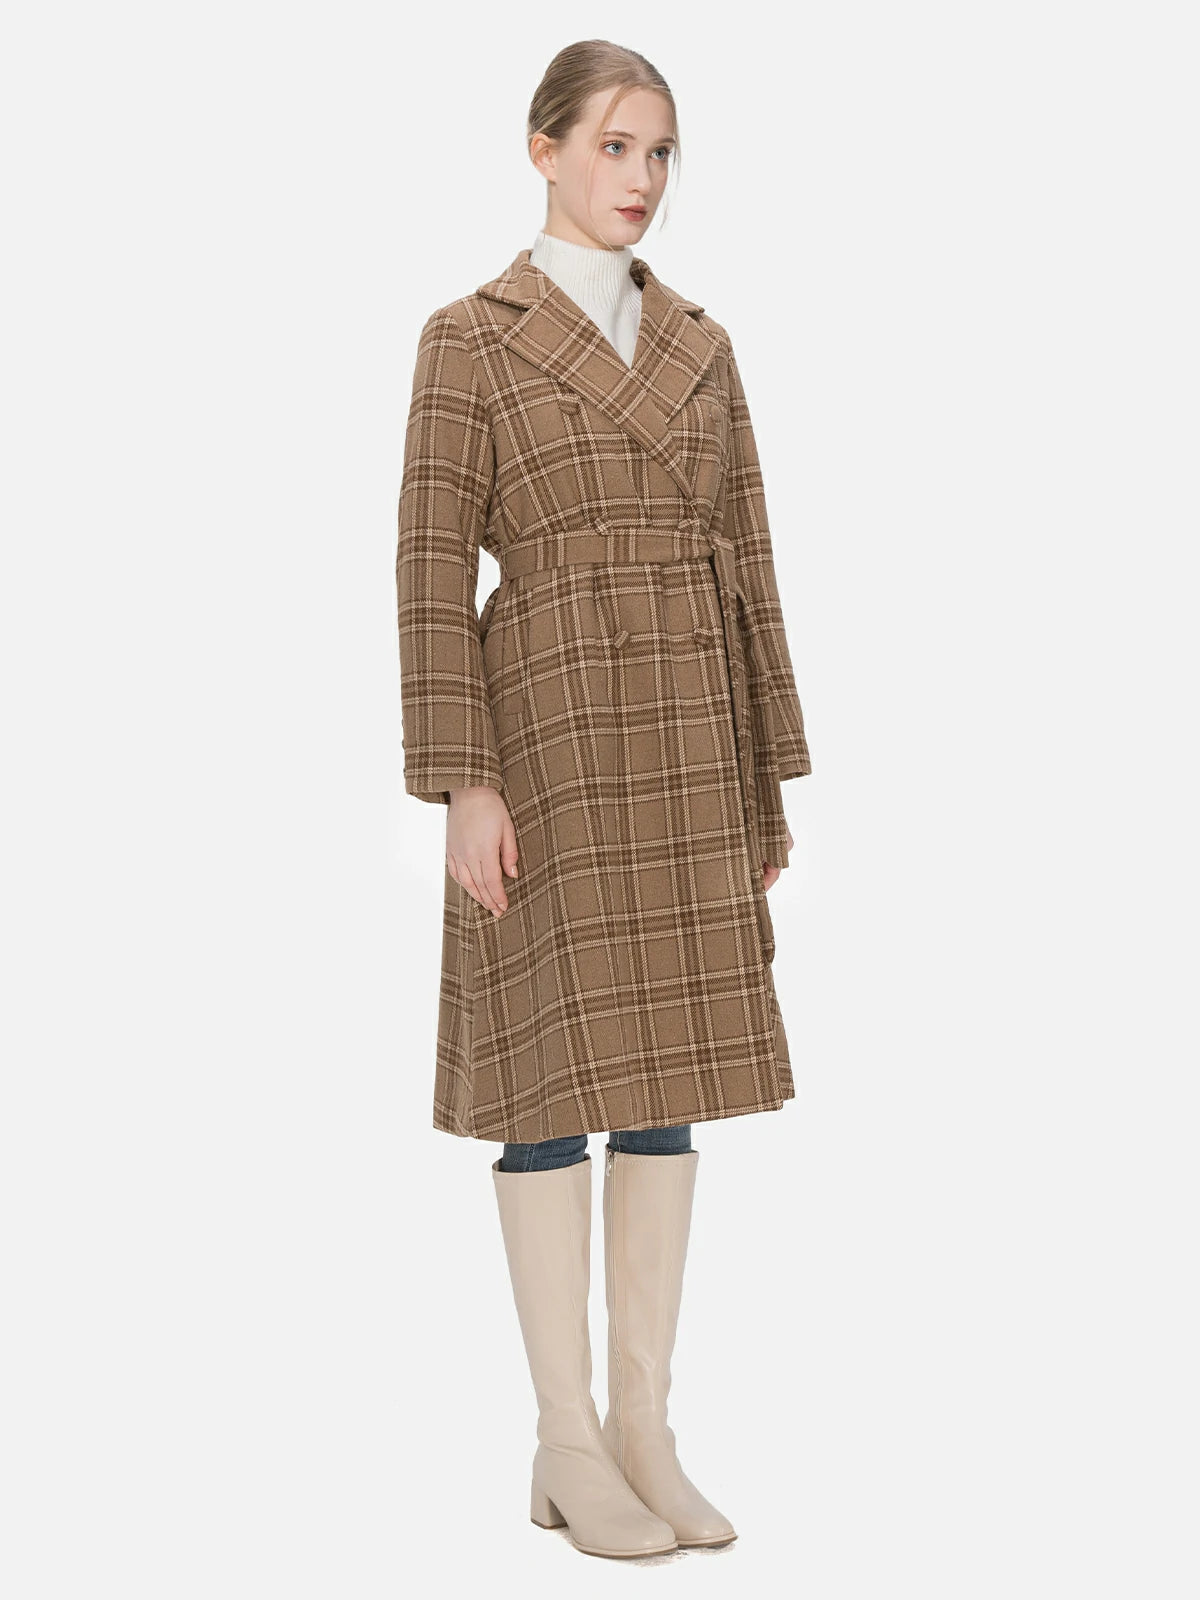 Redefine your outerwear collection with this elegant brown double-breasted coat, showcasing a flat lapel design, belted style, and checkered pattern for a contemporary touch of sophistication.